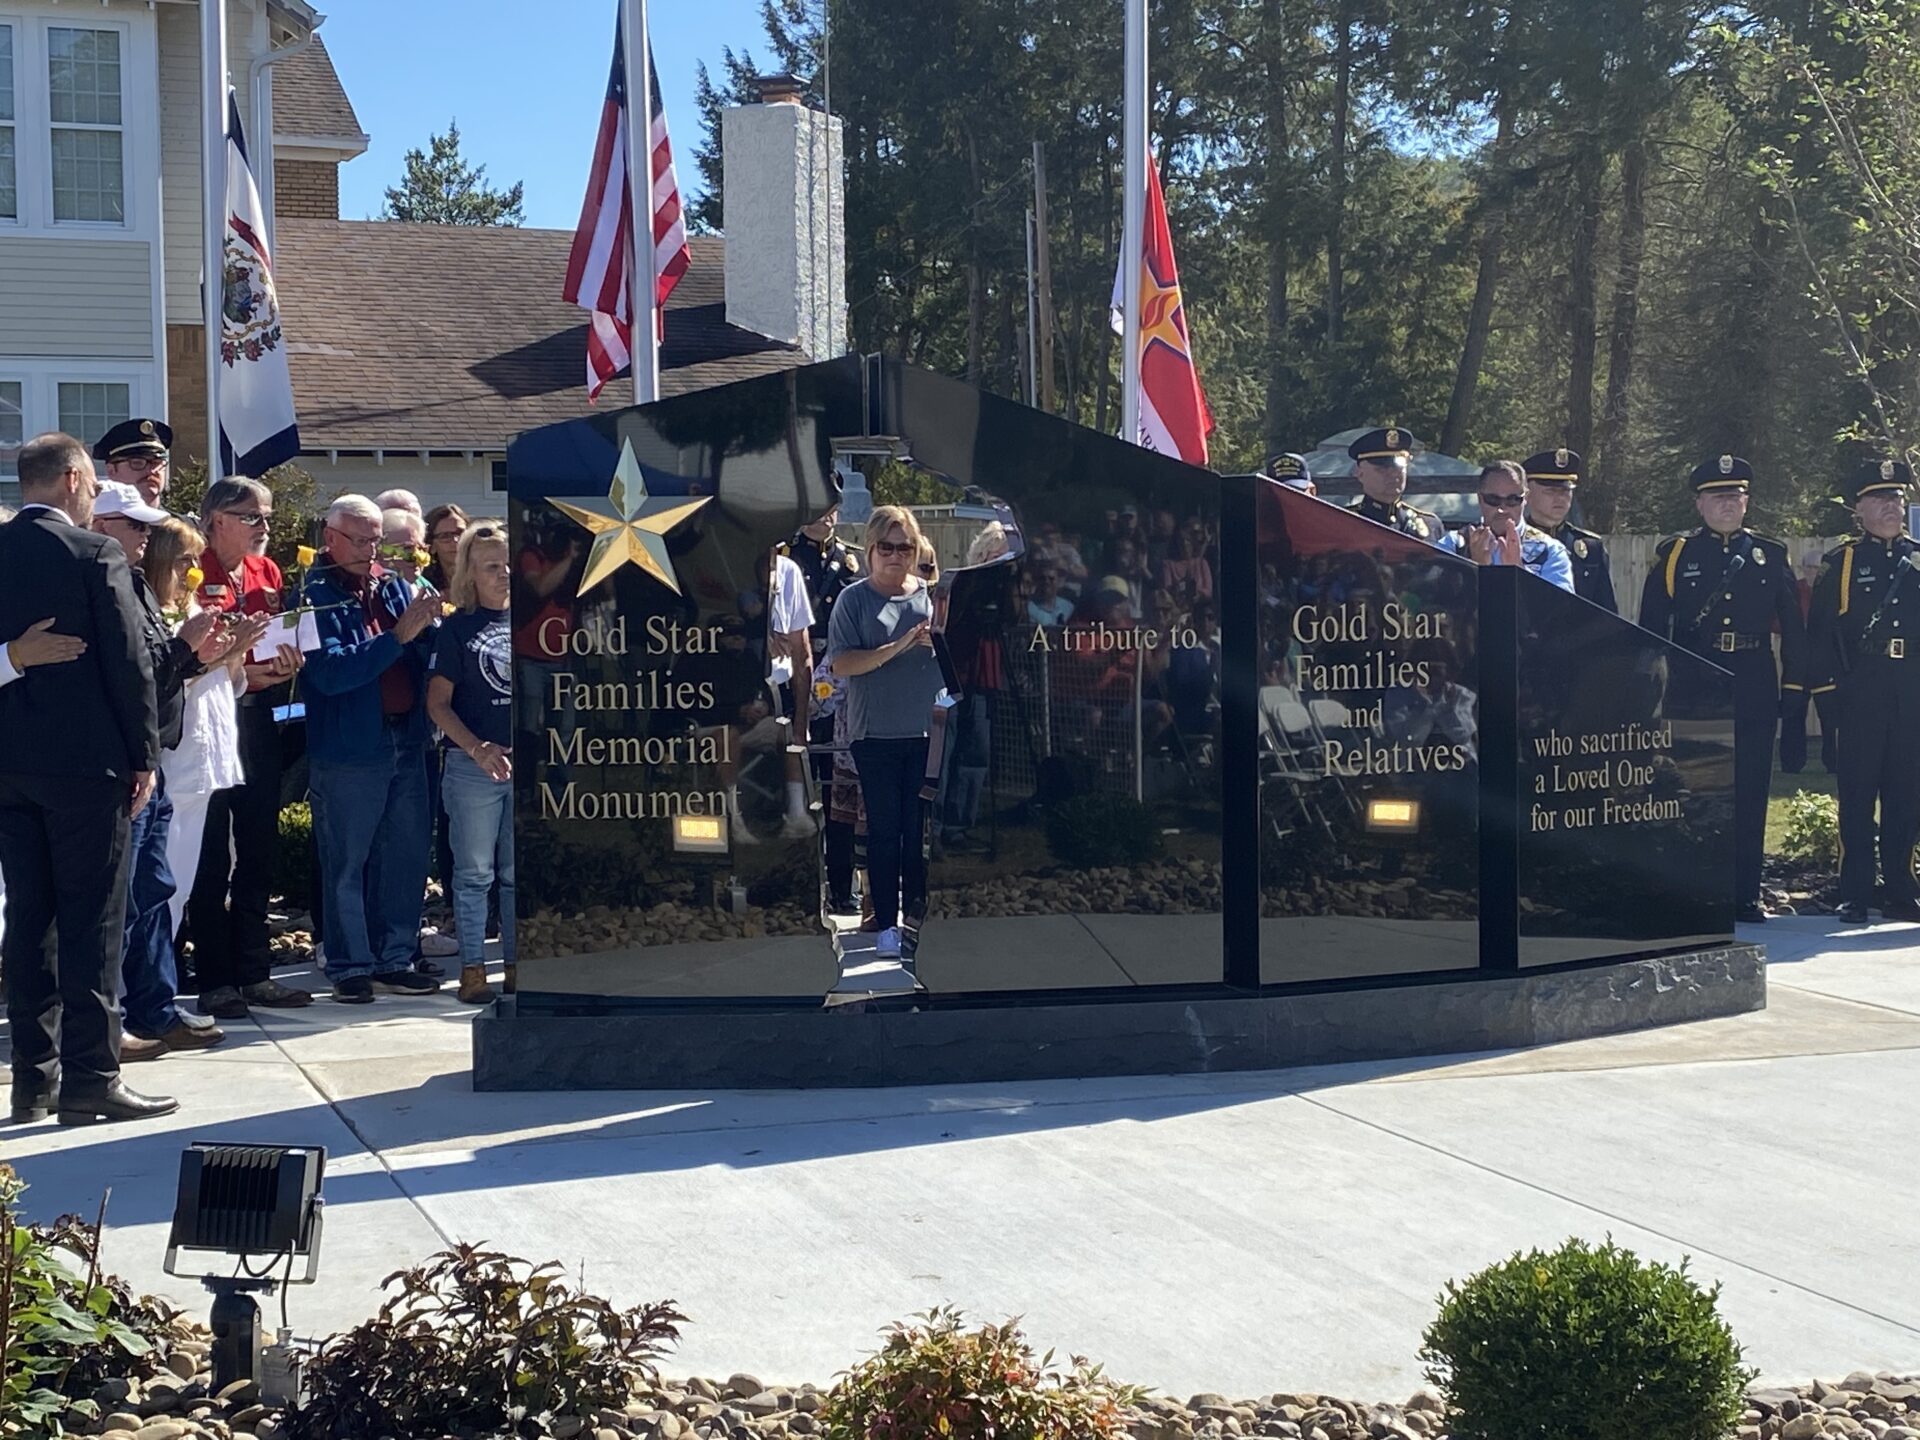 Gold Star Families Monument Unveiled In Huntington On Woody Williams’ 100th Birthday